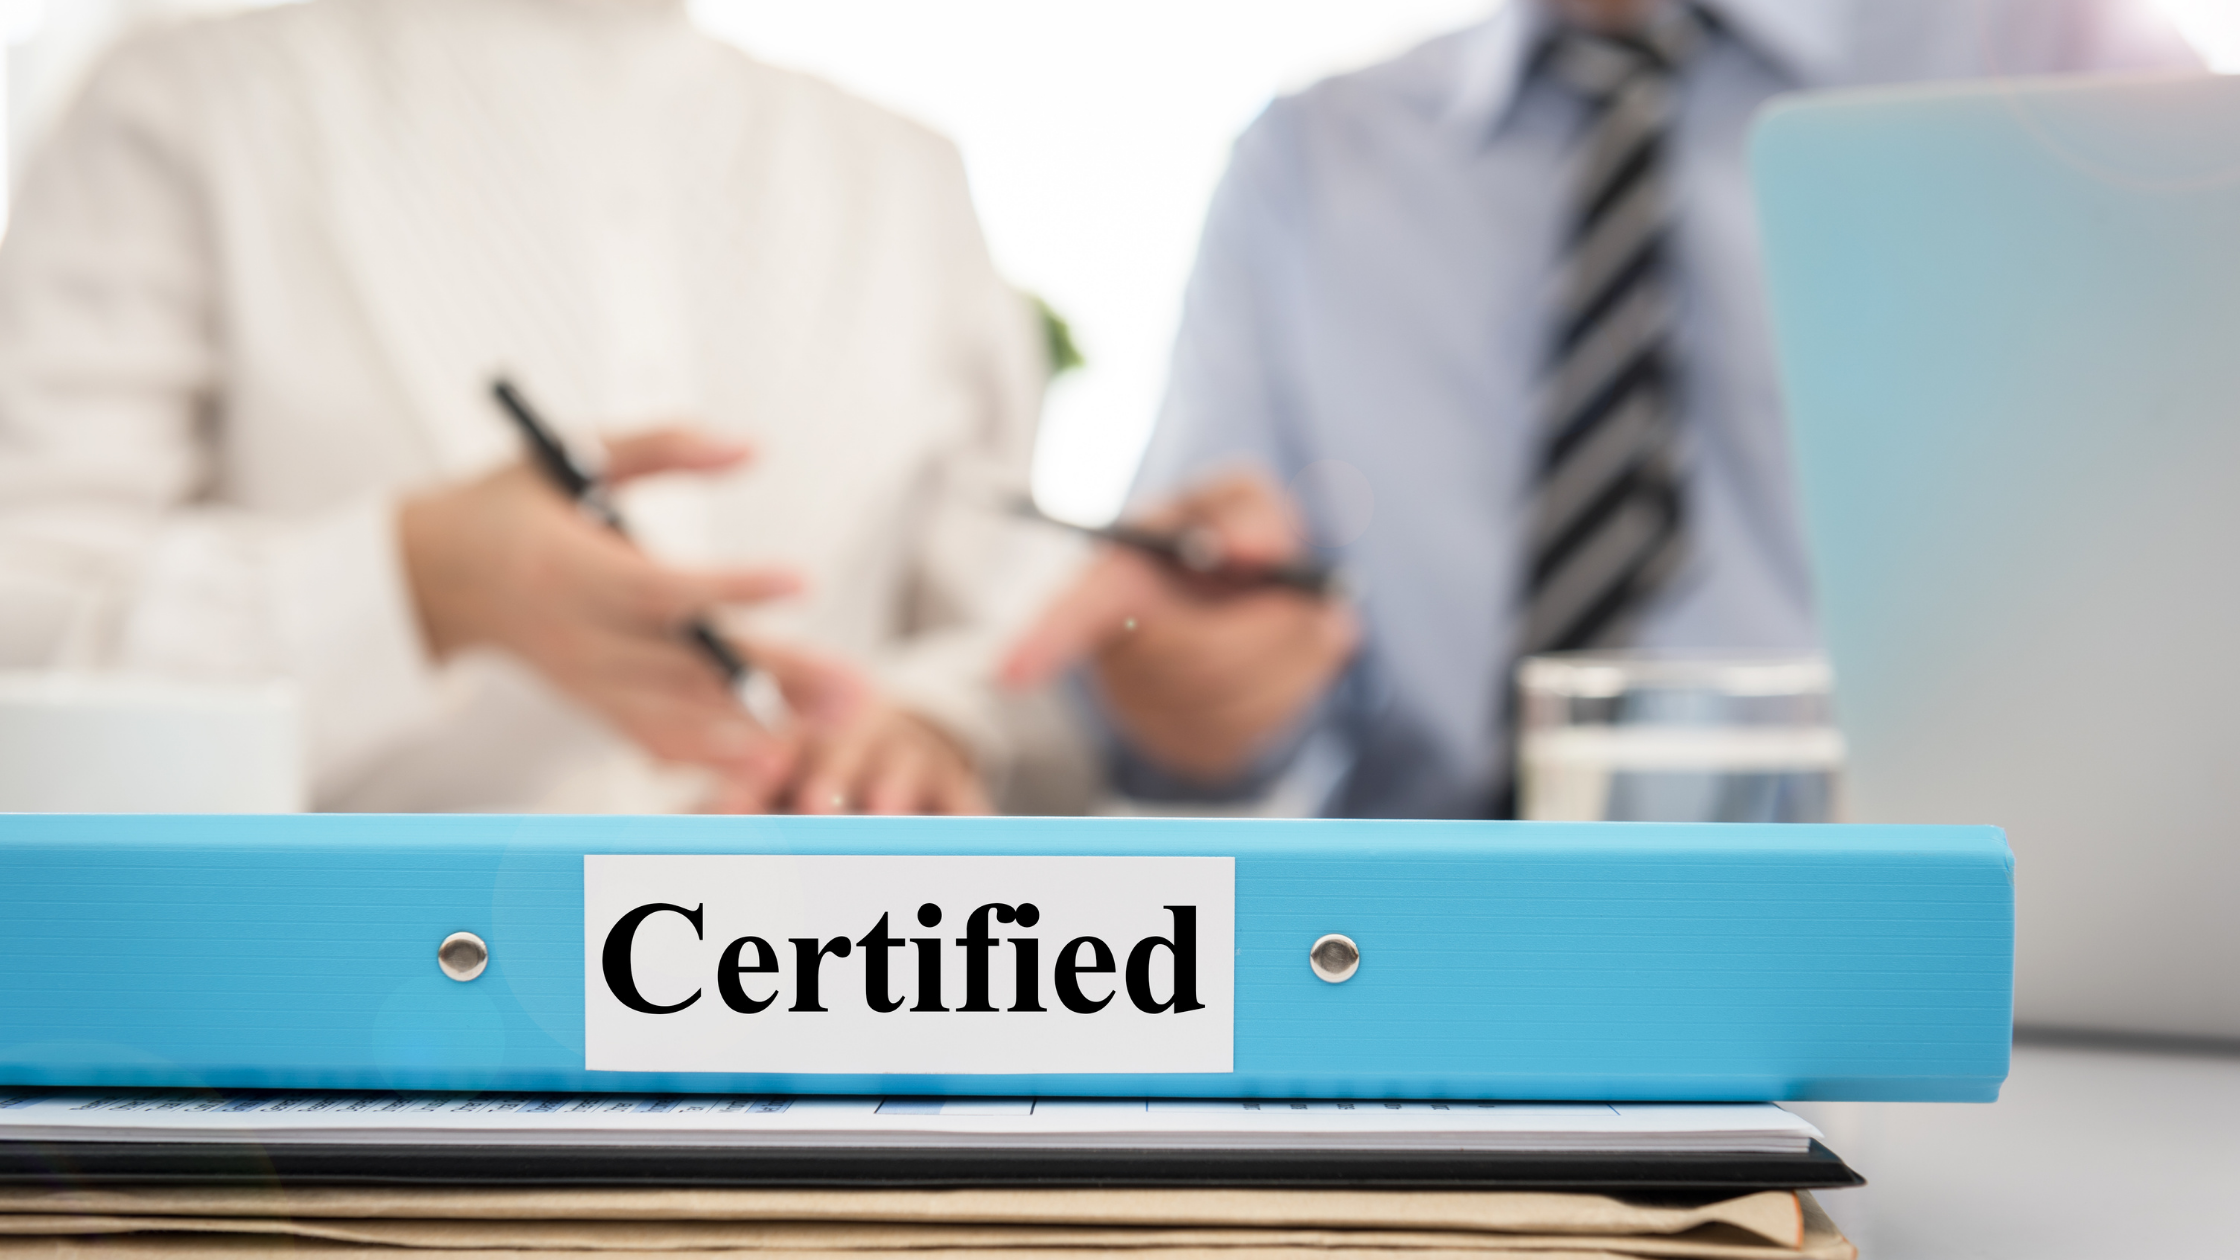 How to become a Certified Professional Executive Coach?